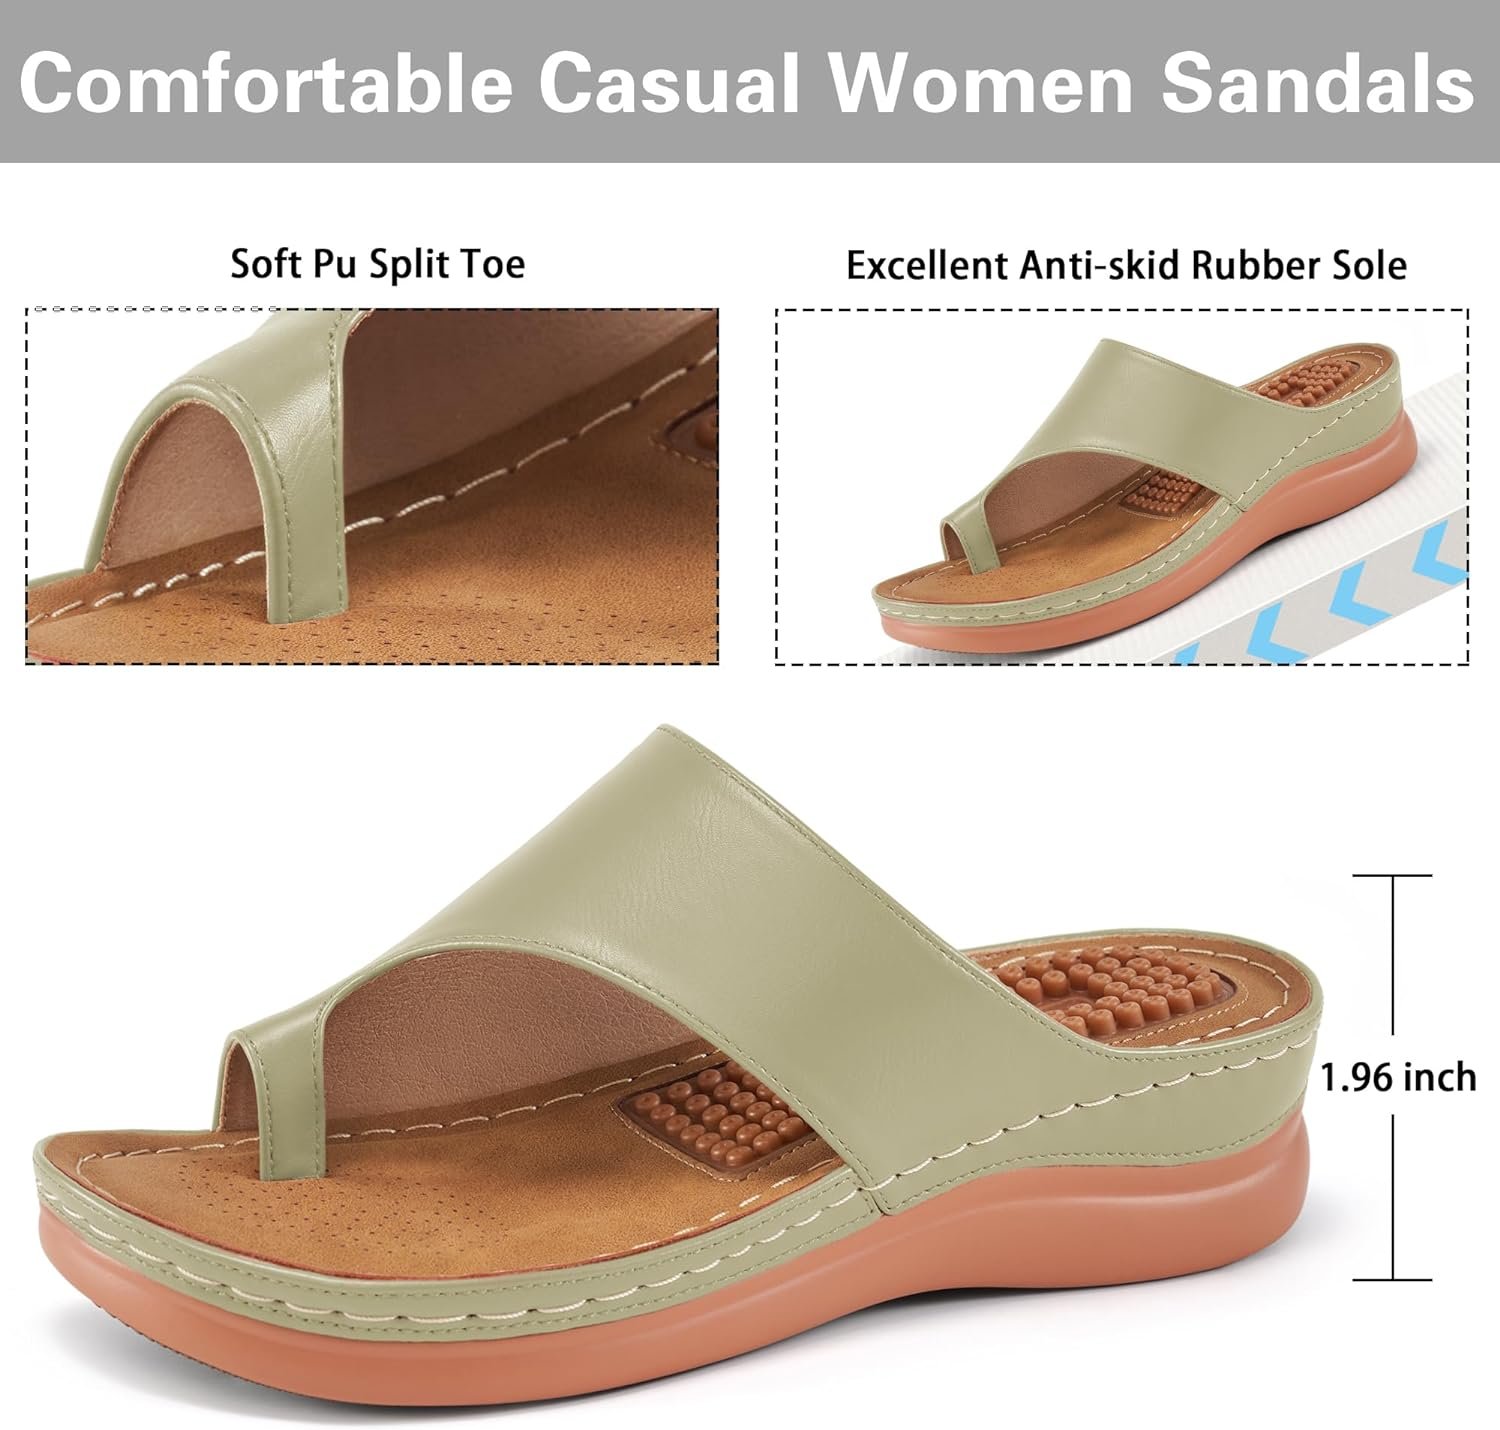 Aomigoct Sandals for Women Wedge Shoes: Comfortable Orthopedic Sandals Womens Dressy Summer Flip Flops Casual Walking Wedges